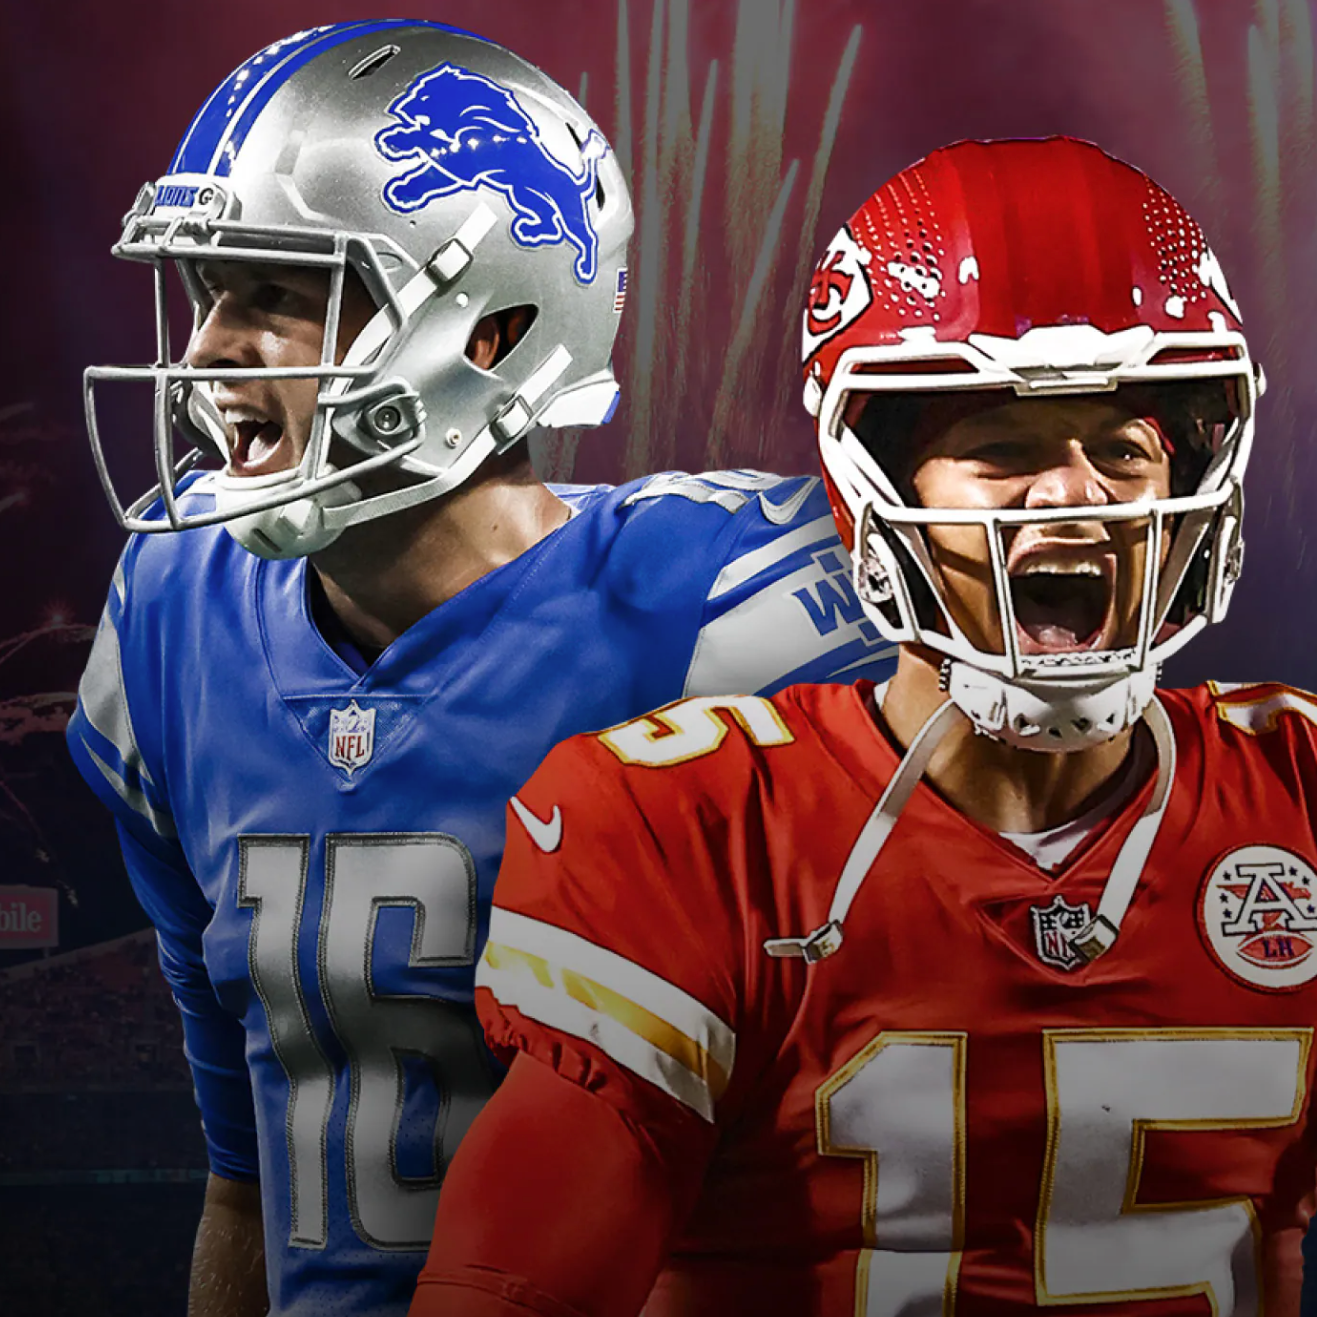 Lions vs Chiefs live stream: How to watch NFL game online tonight